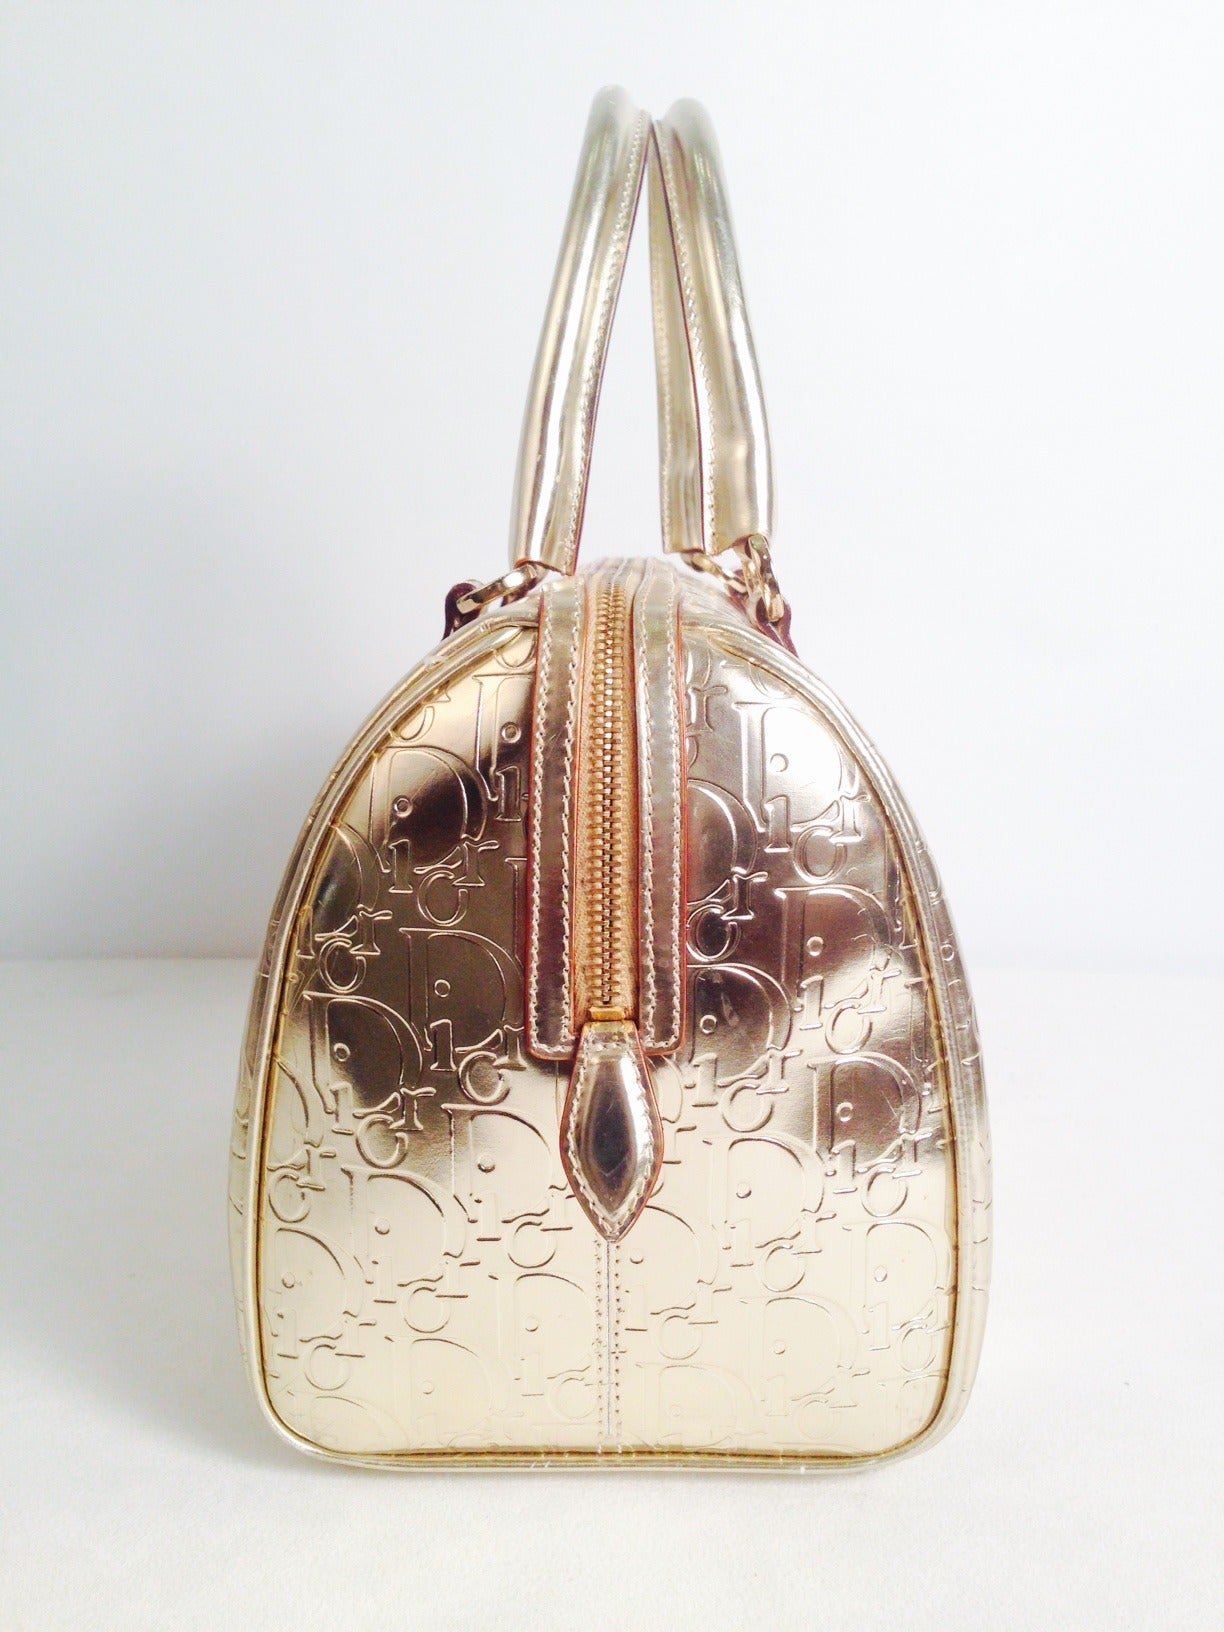 Christian Dior Gold Metallic Embossed Leather Bag In Good Condition For Sale In Palm Beach, FL